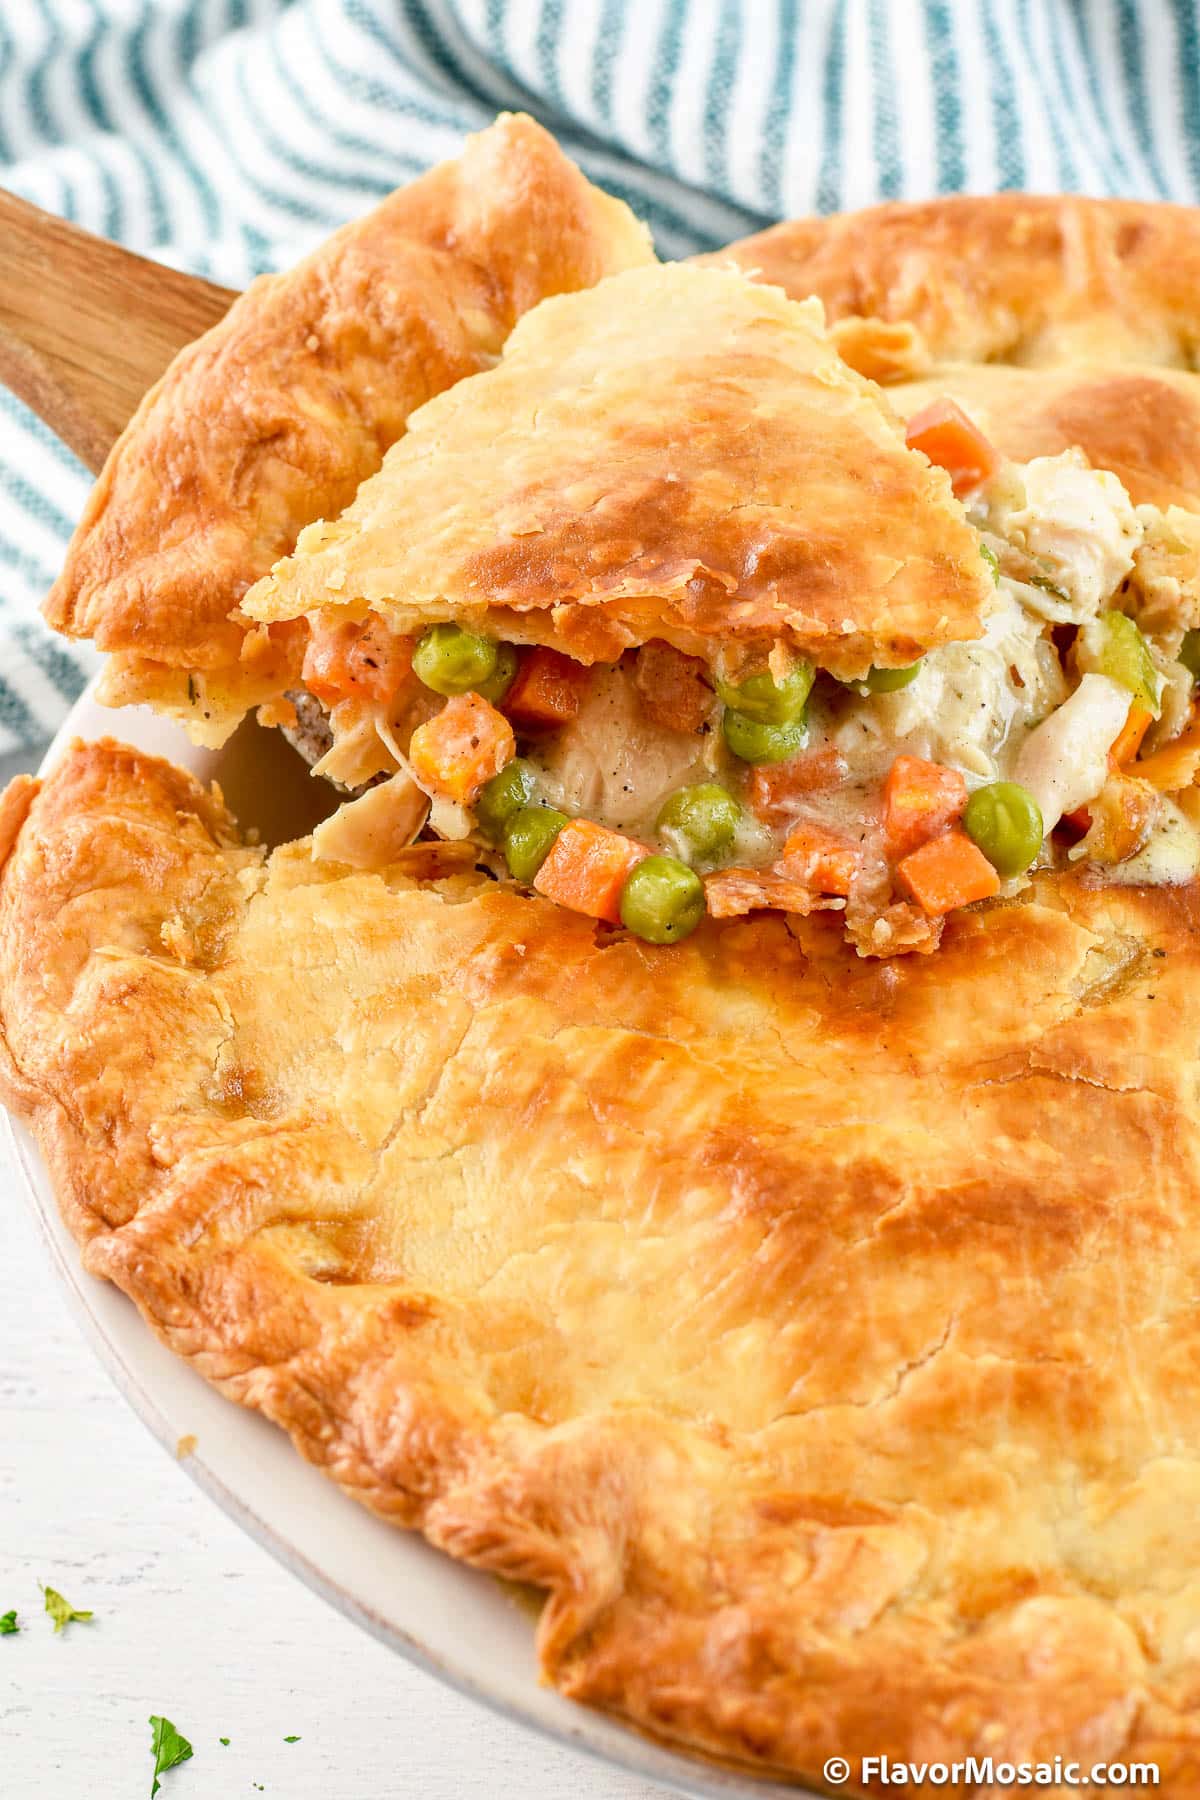 One slice of Chicken Pot Pie Casserole, with its flaky crust, and vegetables in a creamy sauce, is being lifted out of the whole chicken pot pie.